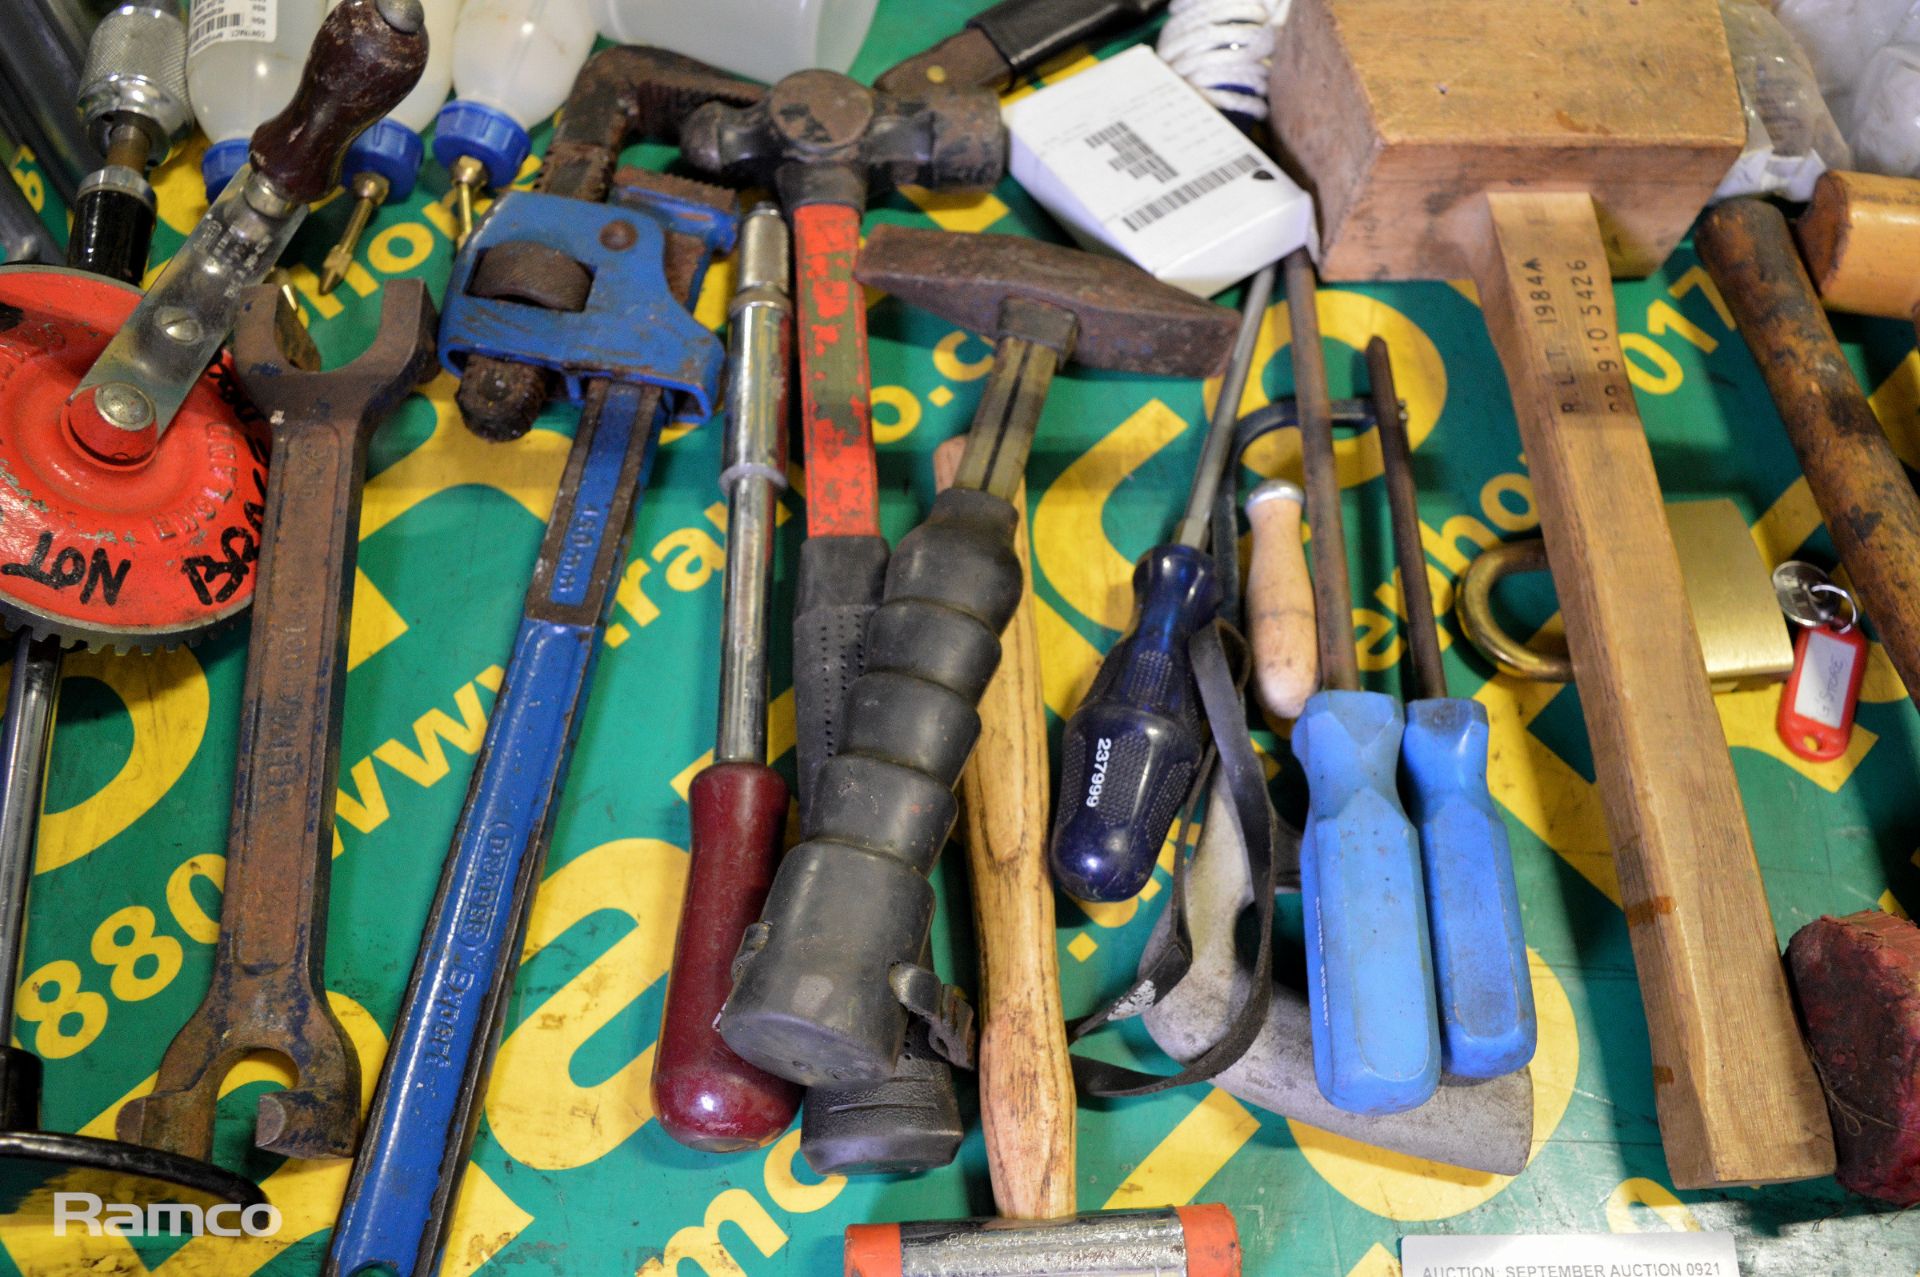 Hand Tools - Mallet, Goggles, Hammer, Screwdriver, hand drill, oil cans, pliers, wrench - Image 2 of 3